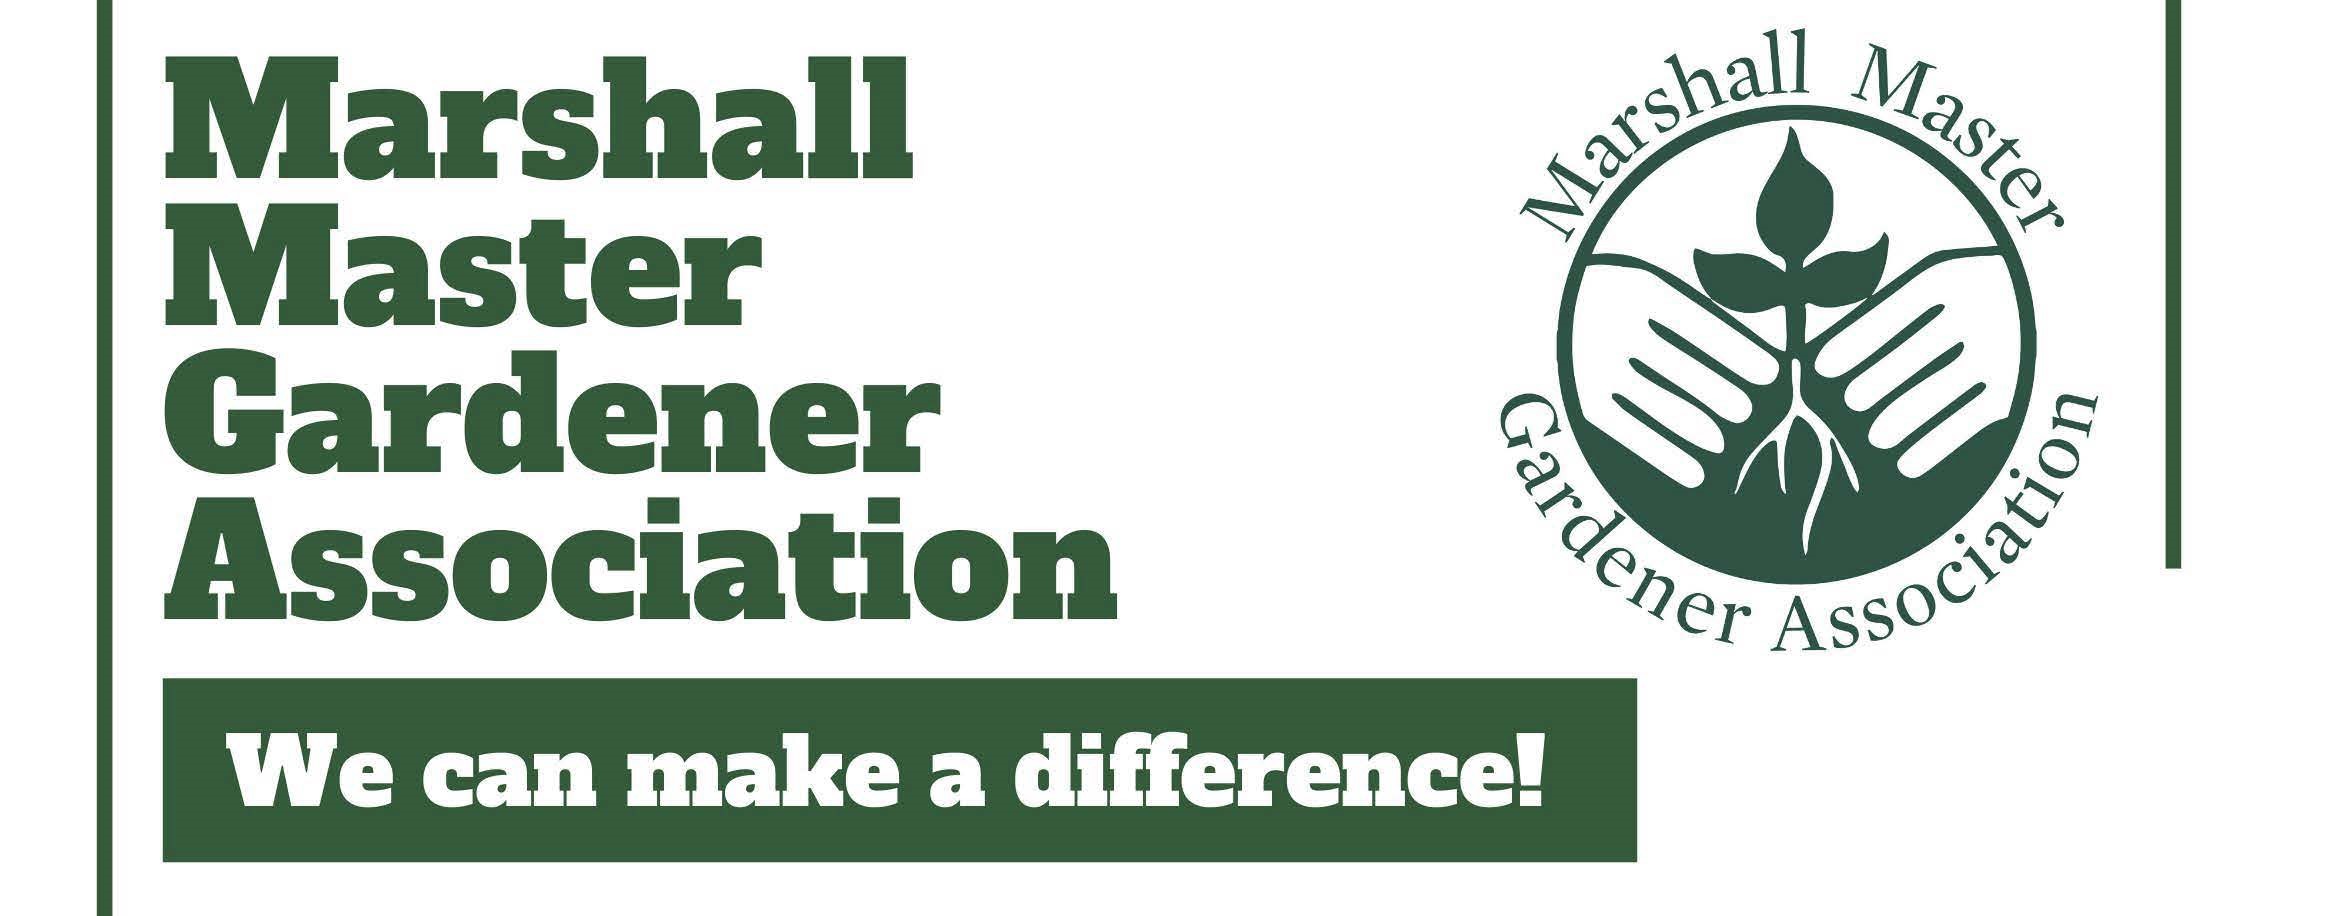 Marshall Master Gardener association we can make a difference!